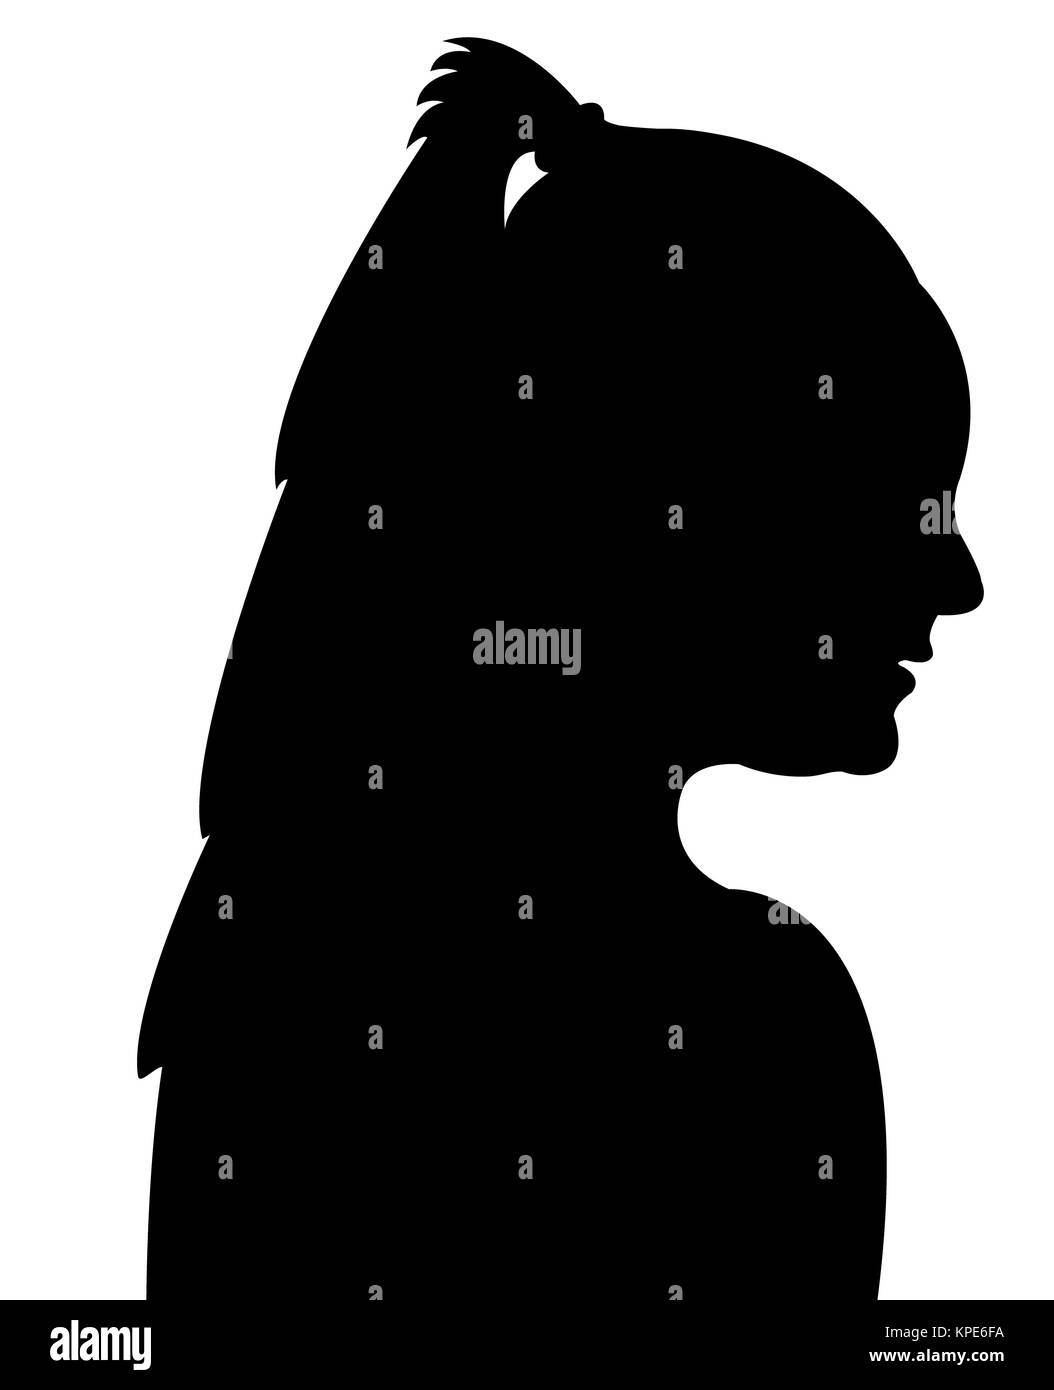 a lady head silhouette Stock Photo